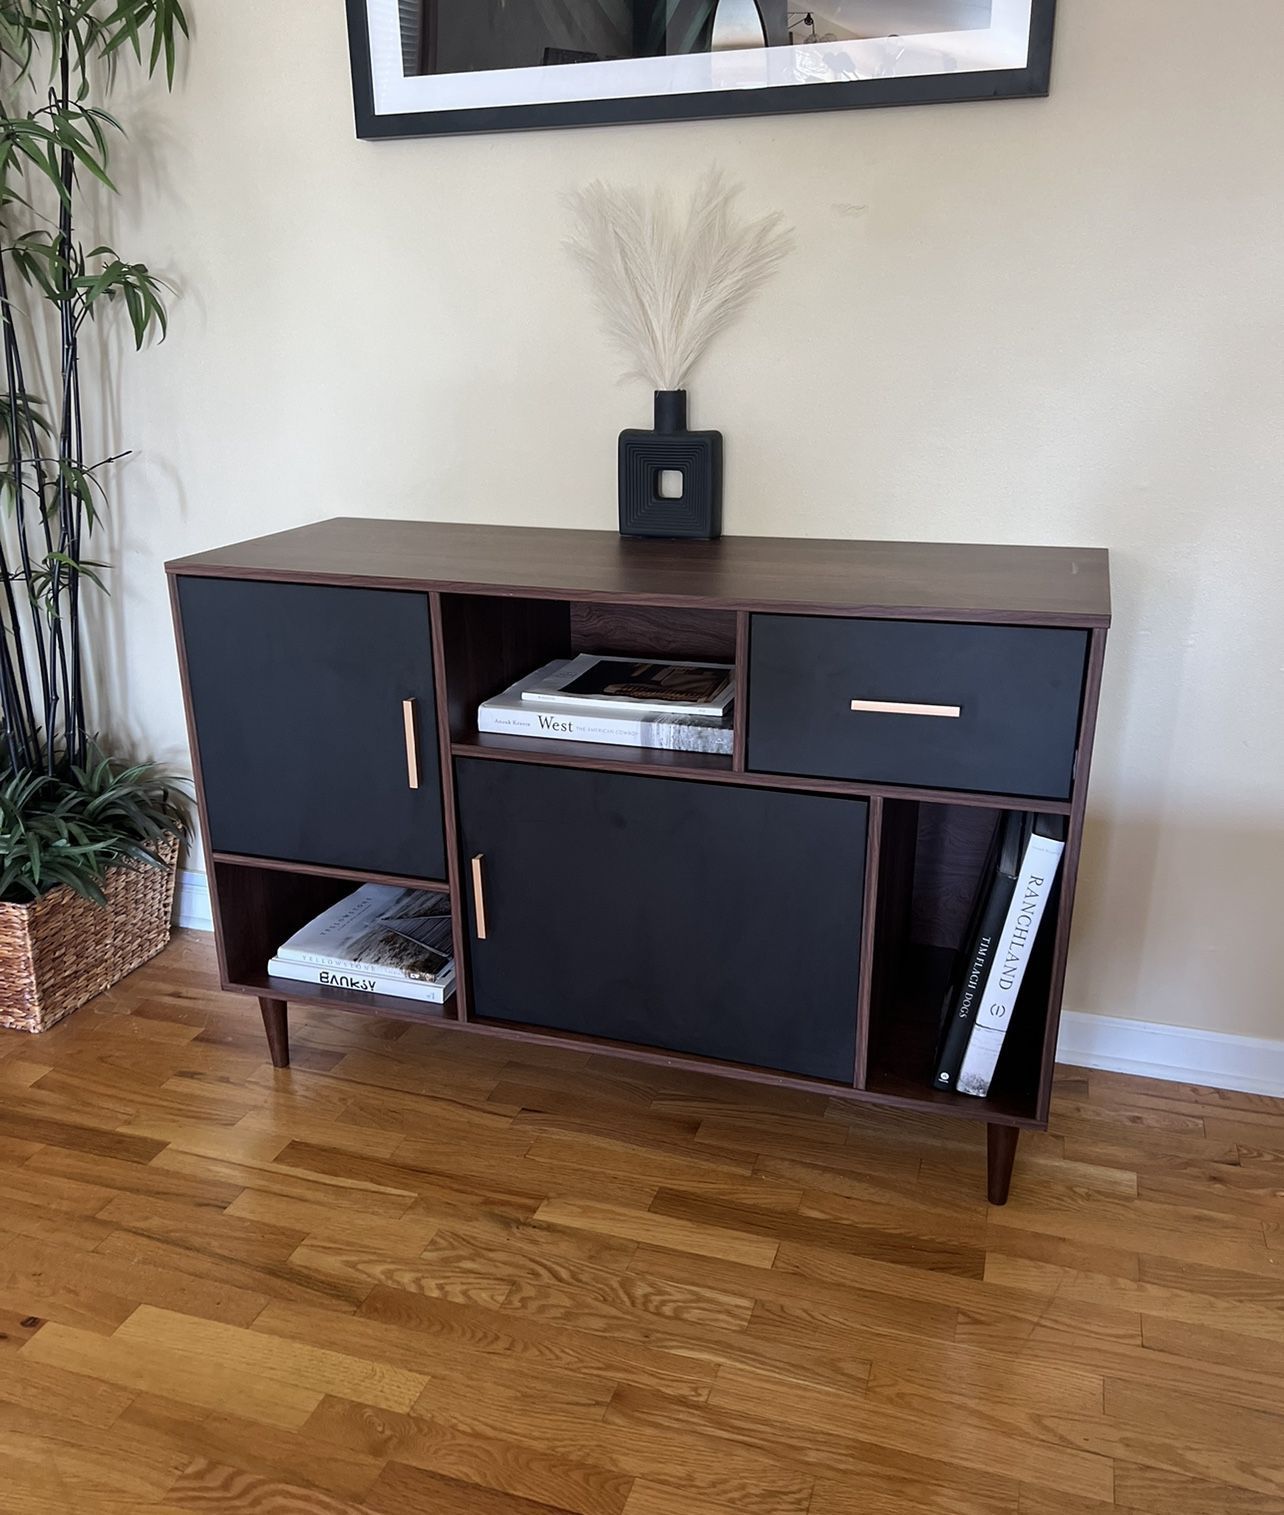 Mid-Century Modern Console Table / TV Stand (up to 47") w/ Storage - Black & Brown Wood